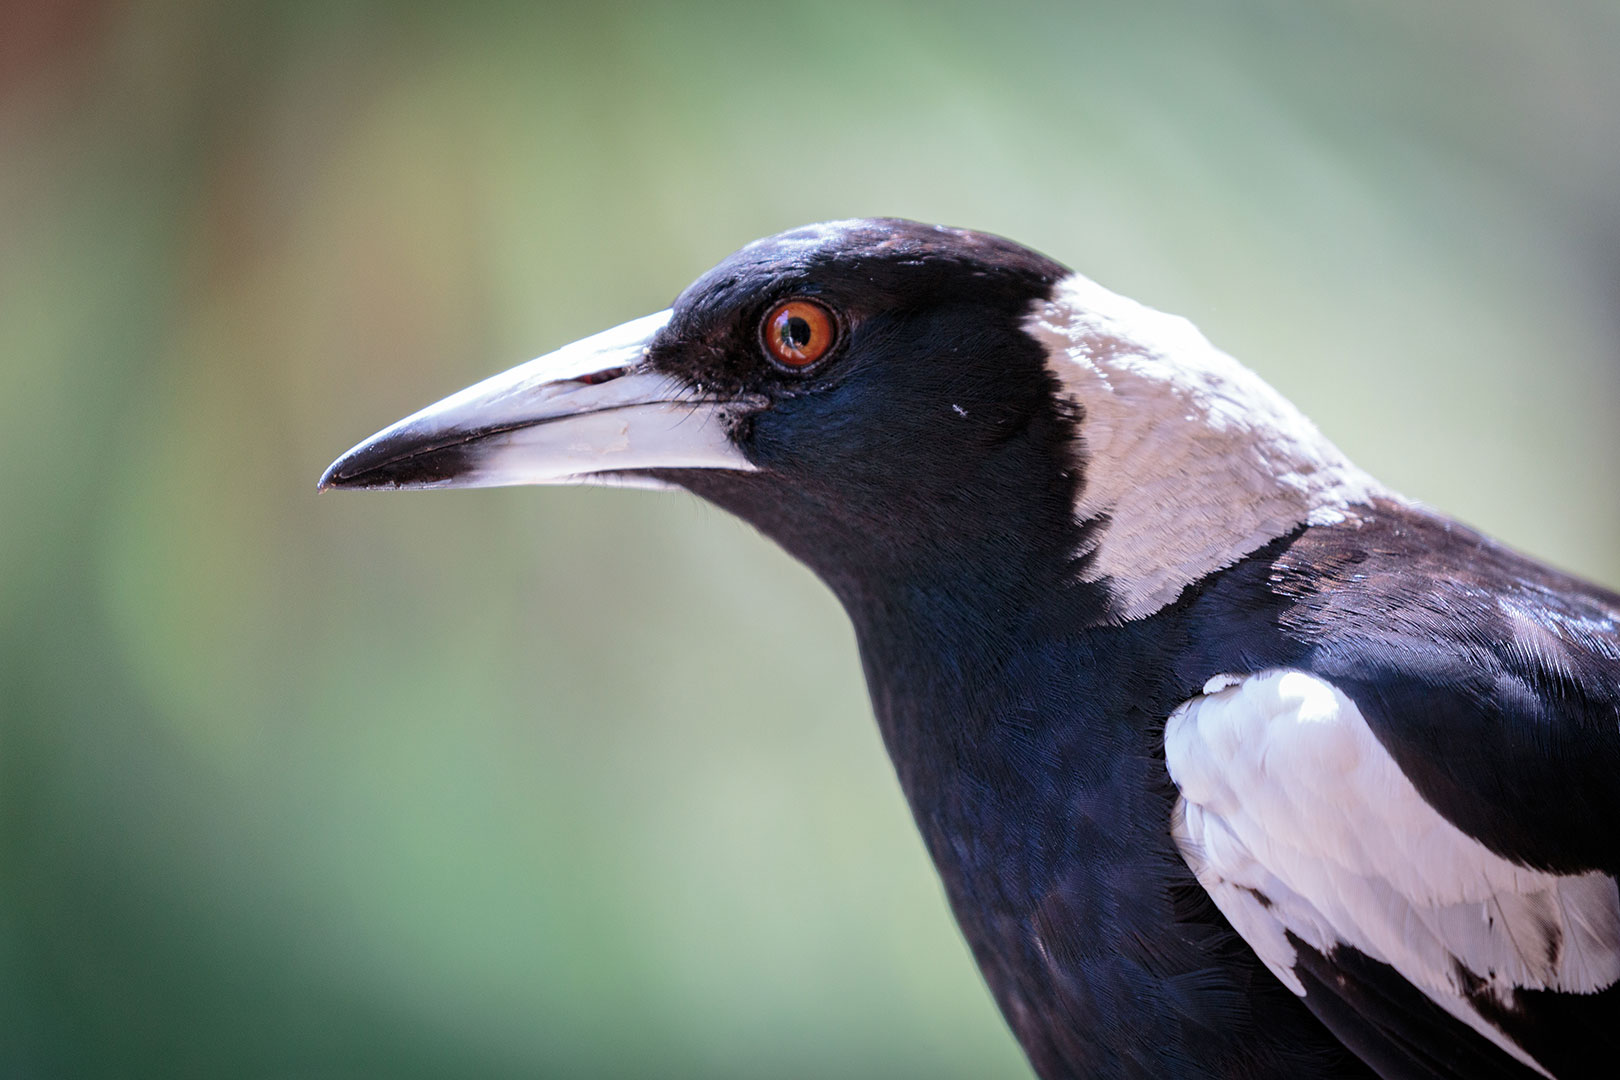 Close-up of an Australian magpie